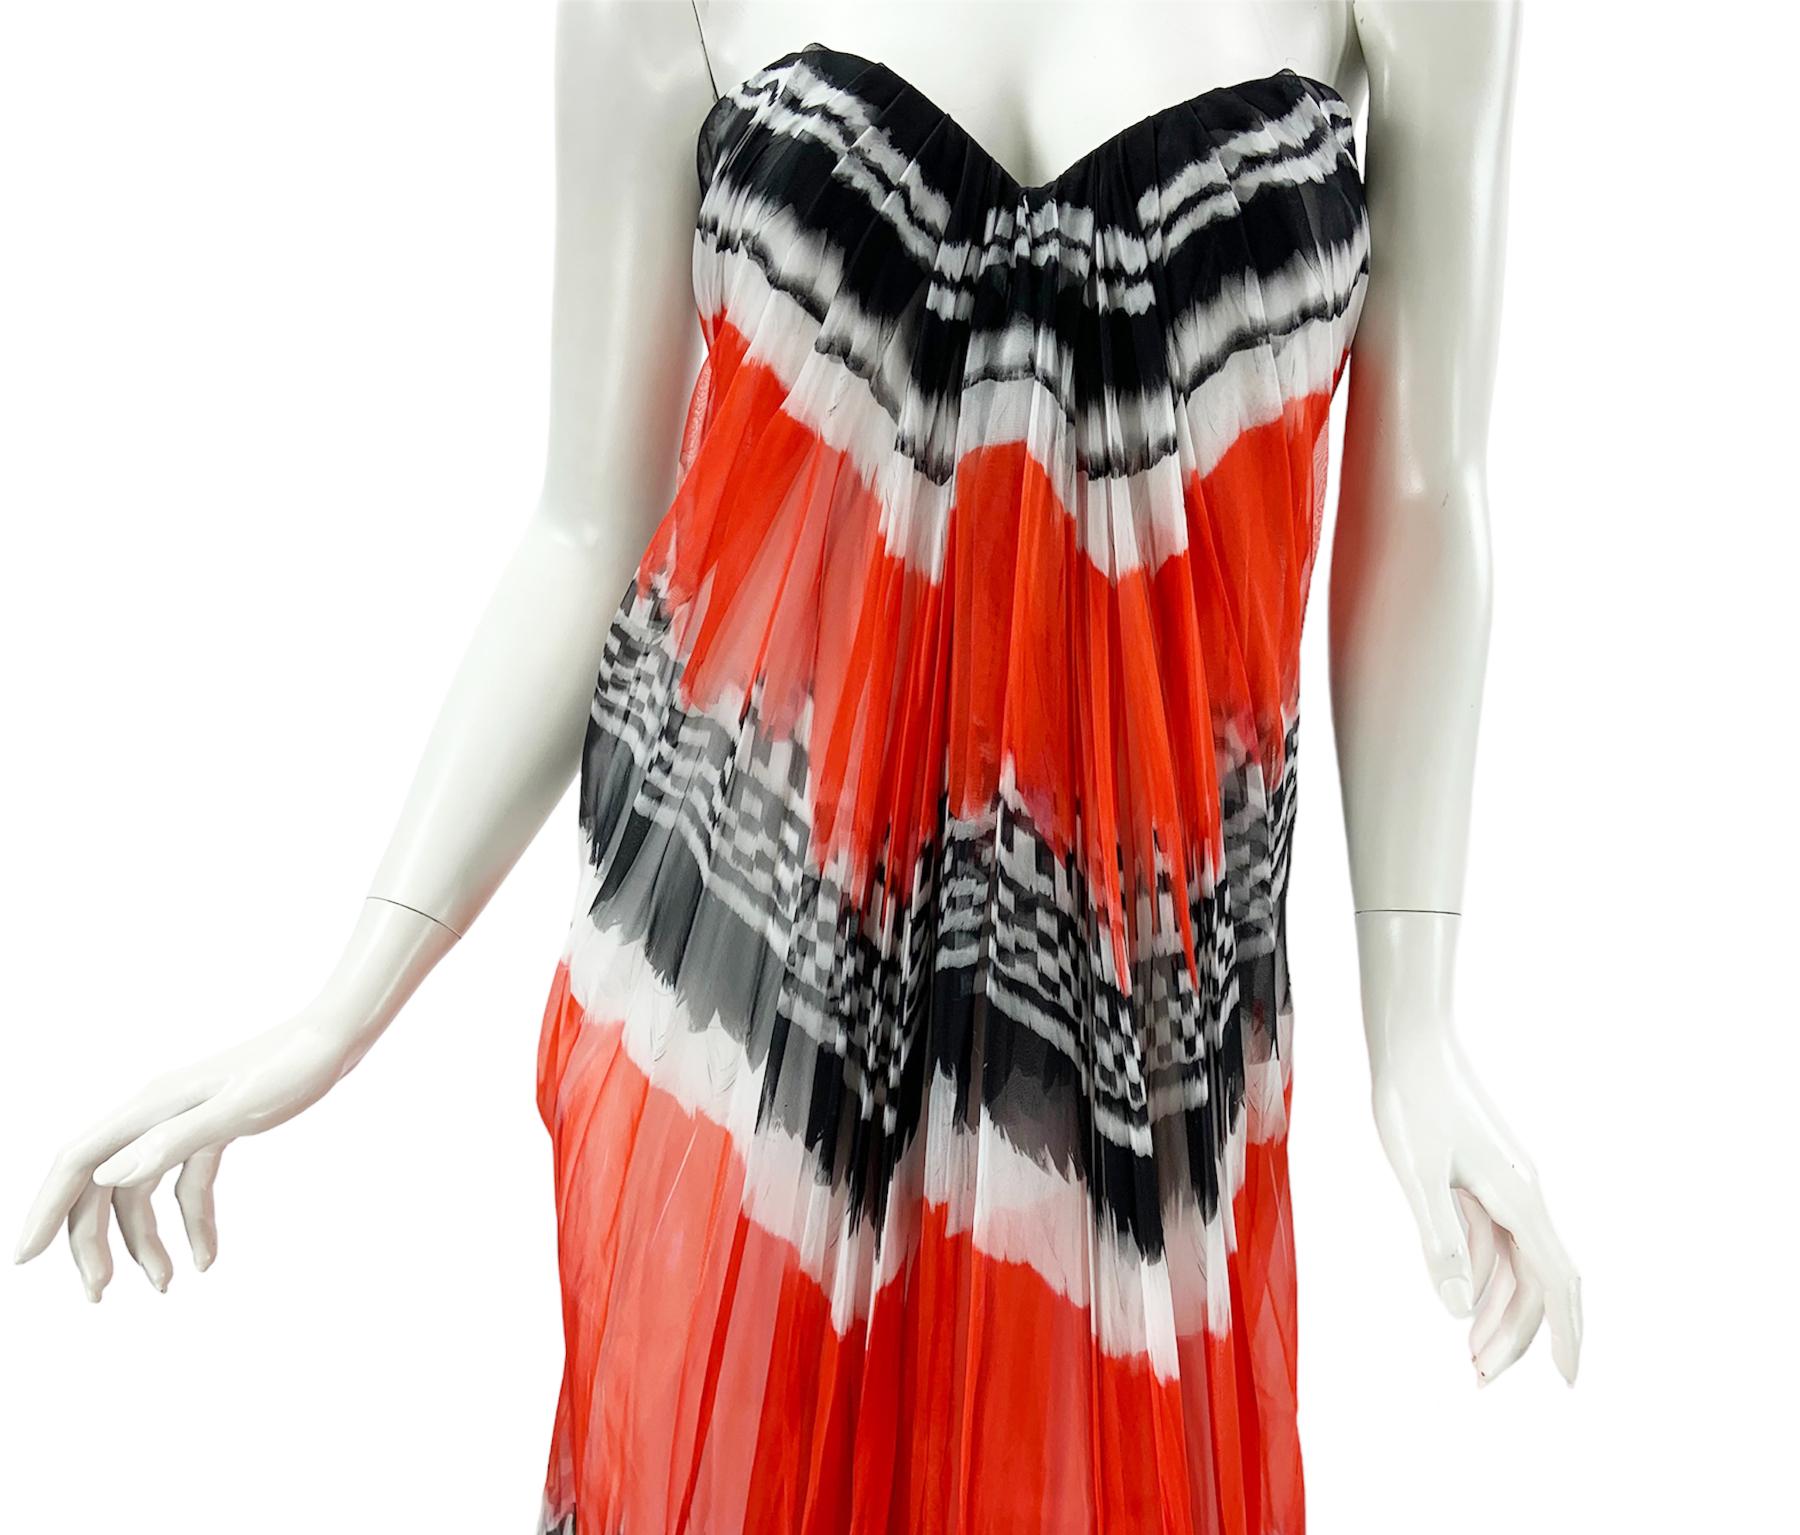 NWT Alexander McQueen S/S 2014 Silk Feather Print Bustier Dress Gown It 46 US 10 For Sale 3